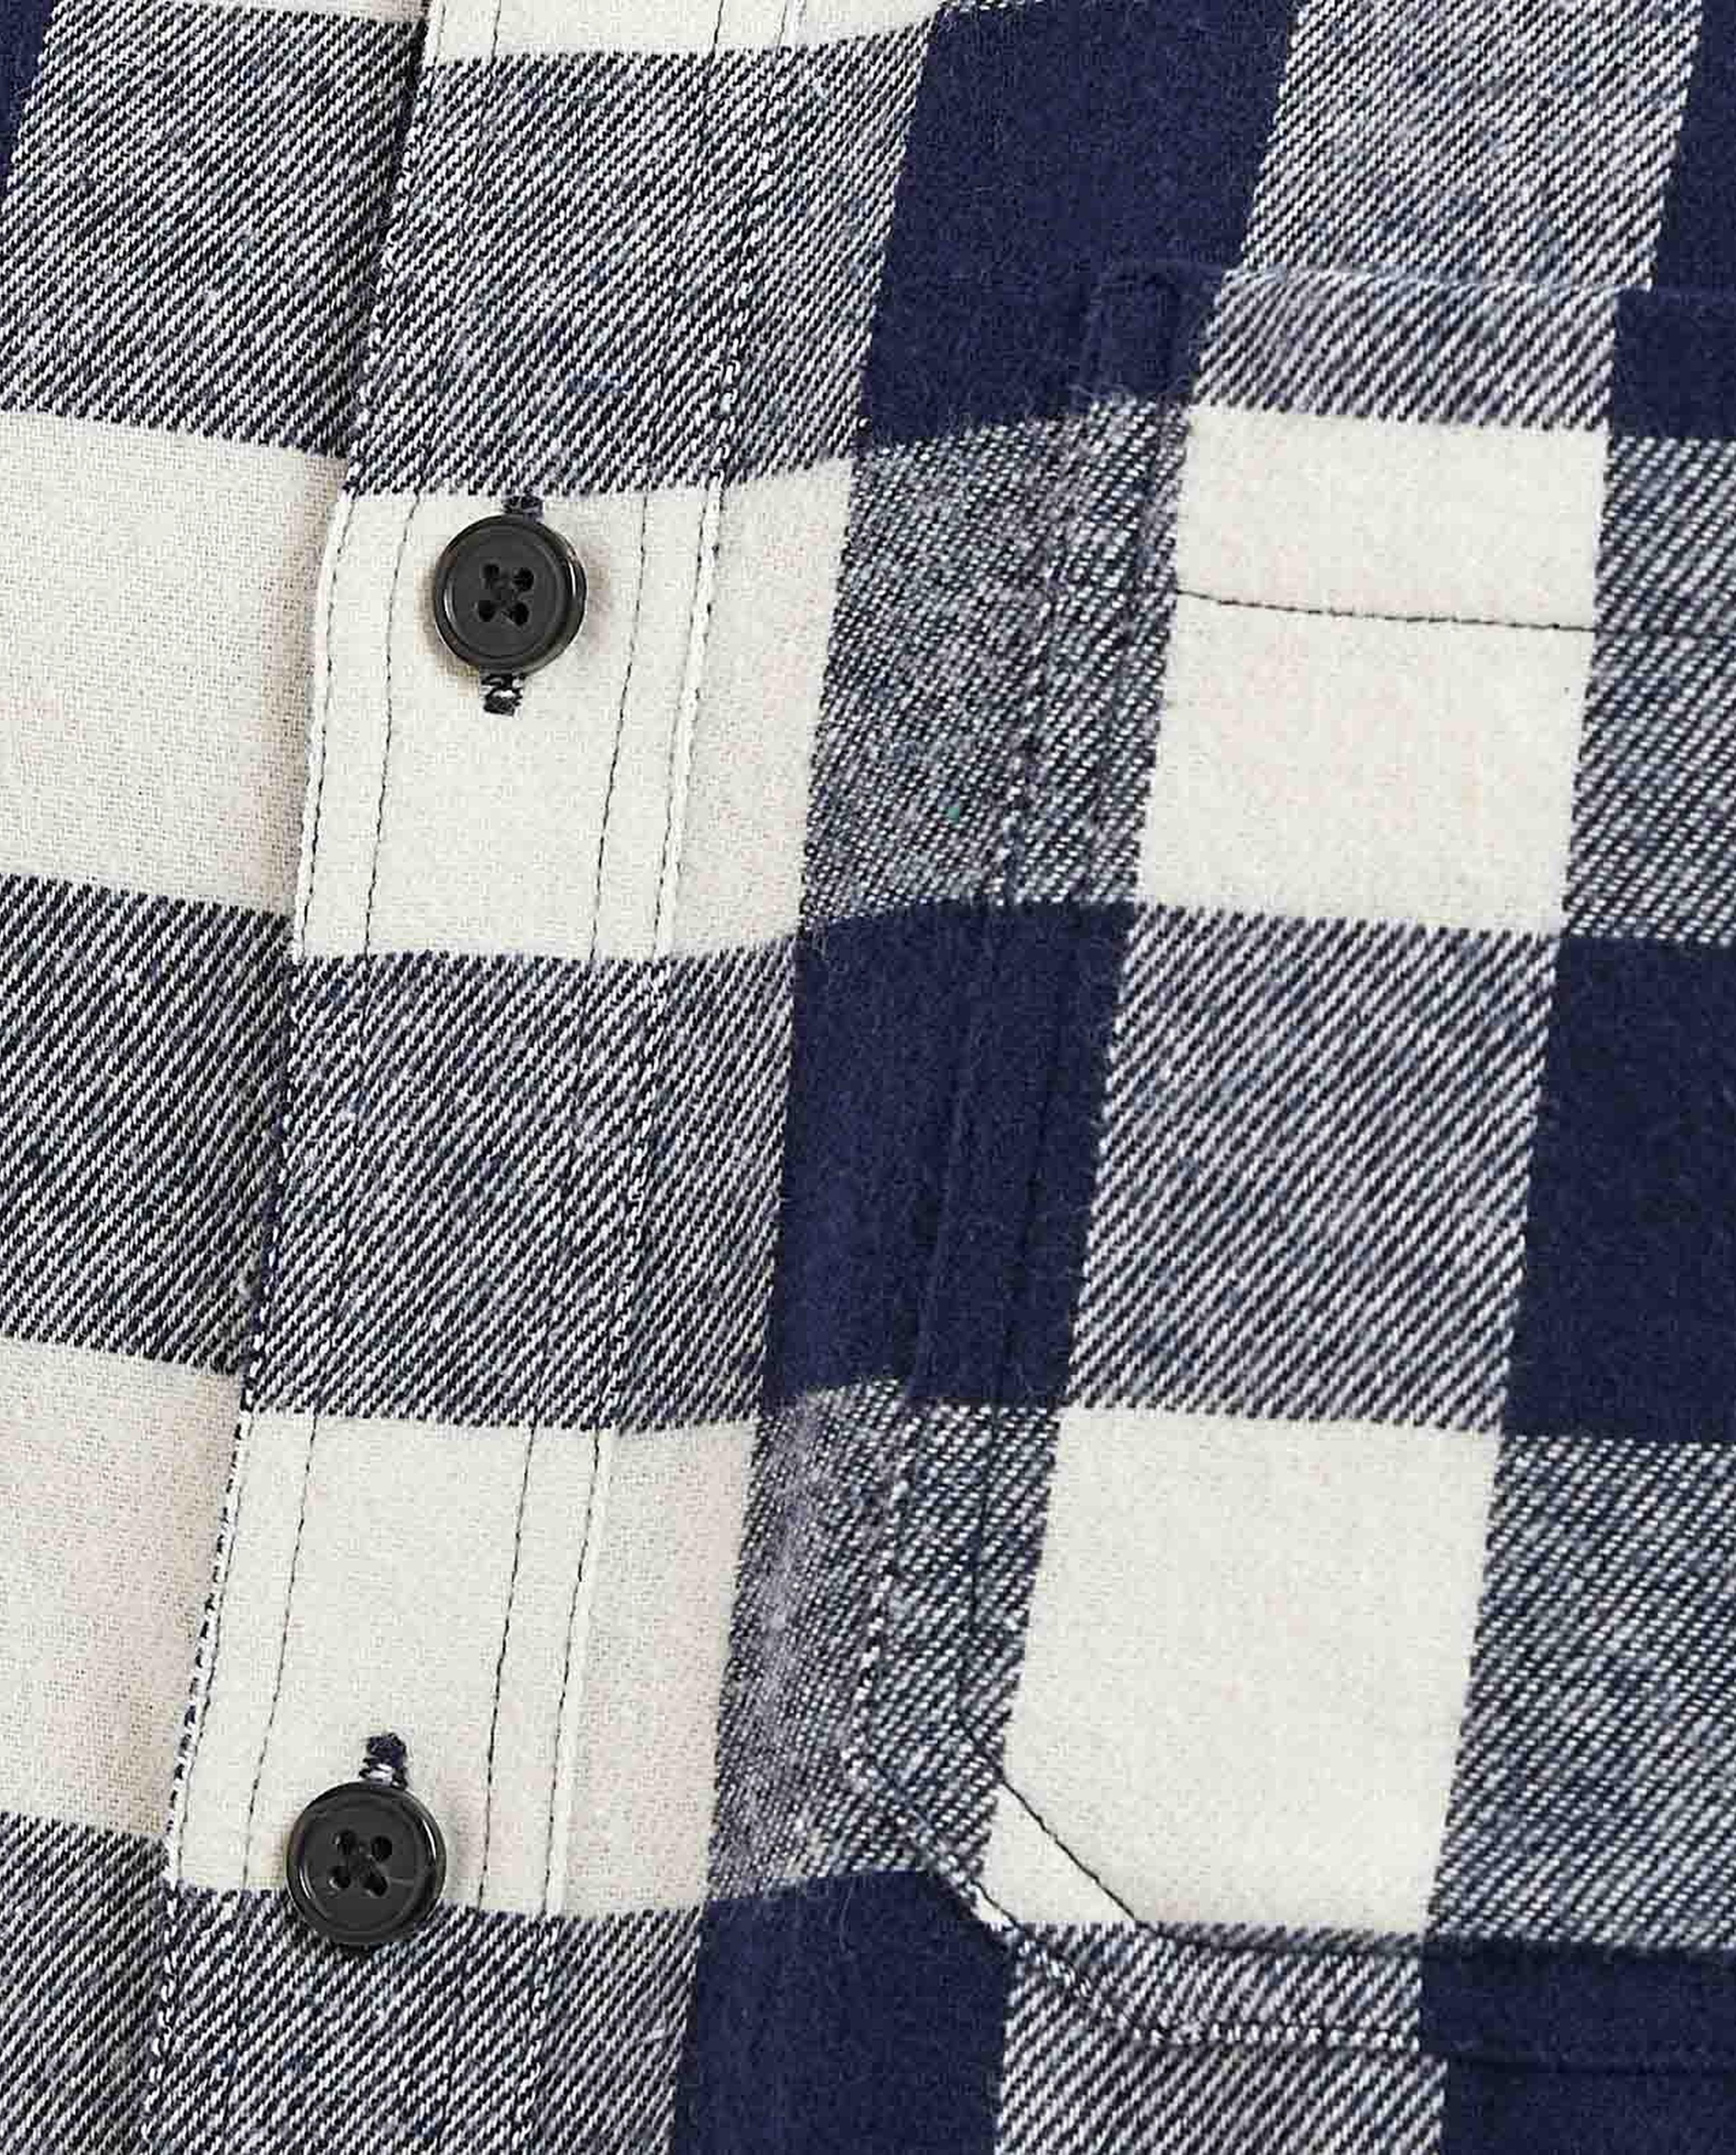 Checked Shirt with Classic Collar and Long Sleeves